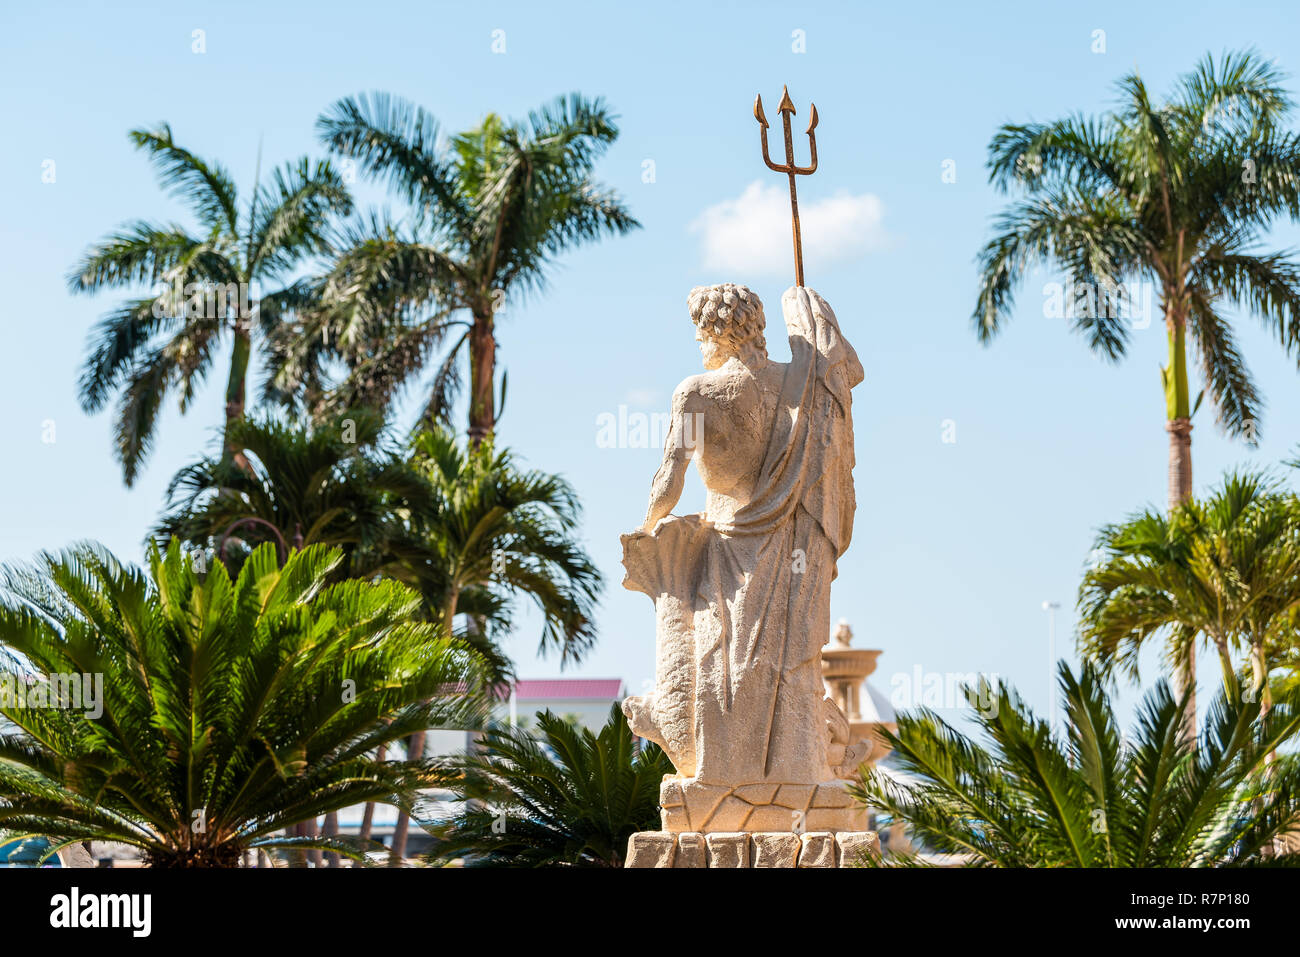 Naples, USA - April 30, 2018: Bayfront residential community and shopping center with Neptune statue, sculpture fountain, palm trees, blue sky Stock Photo